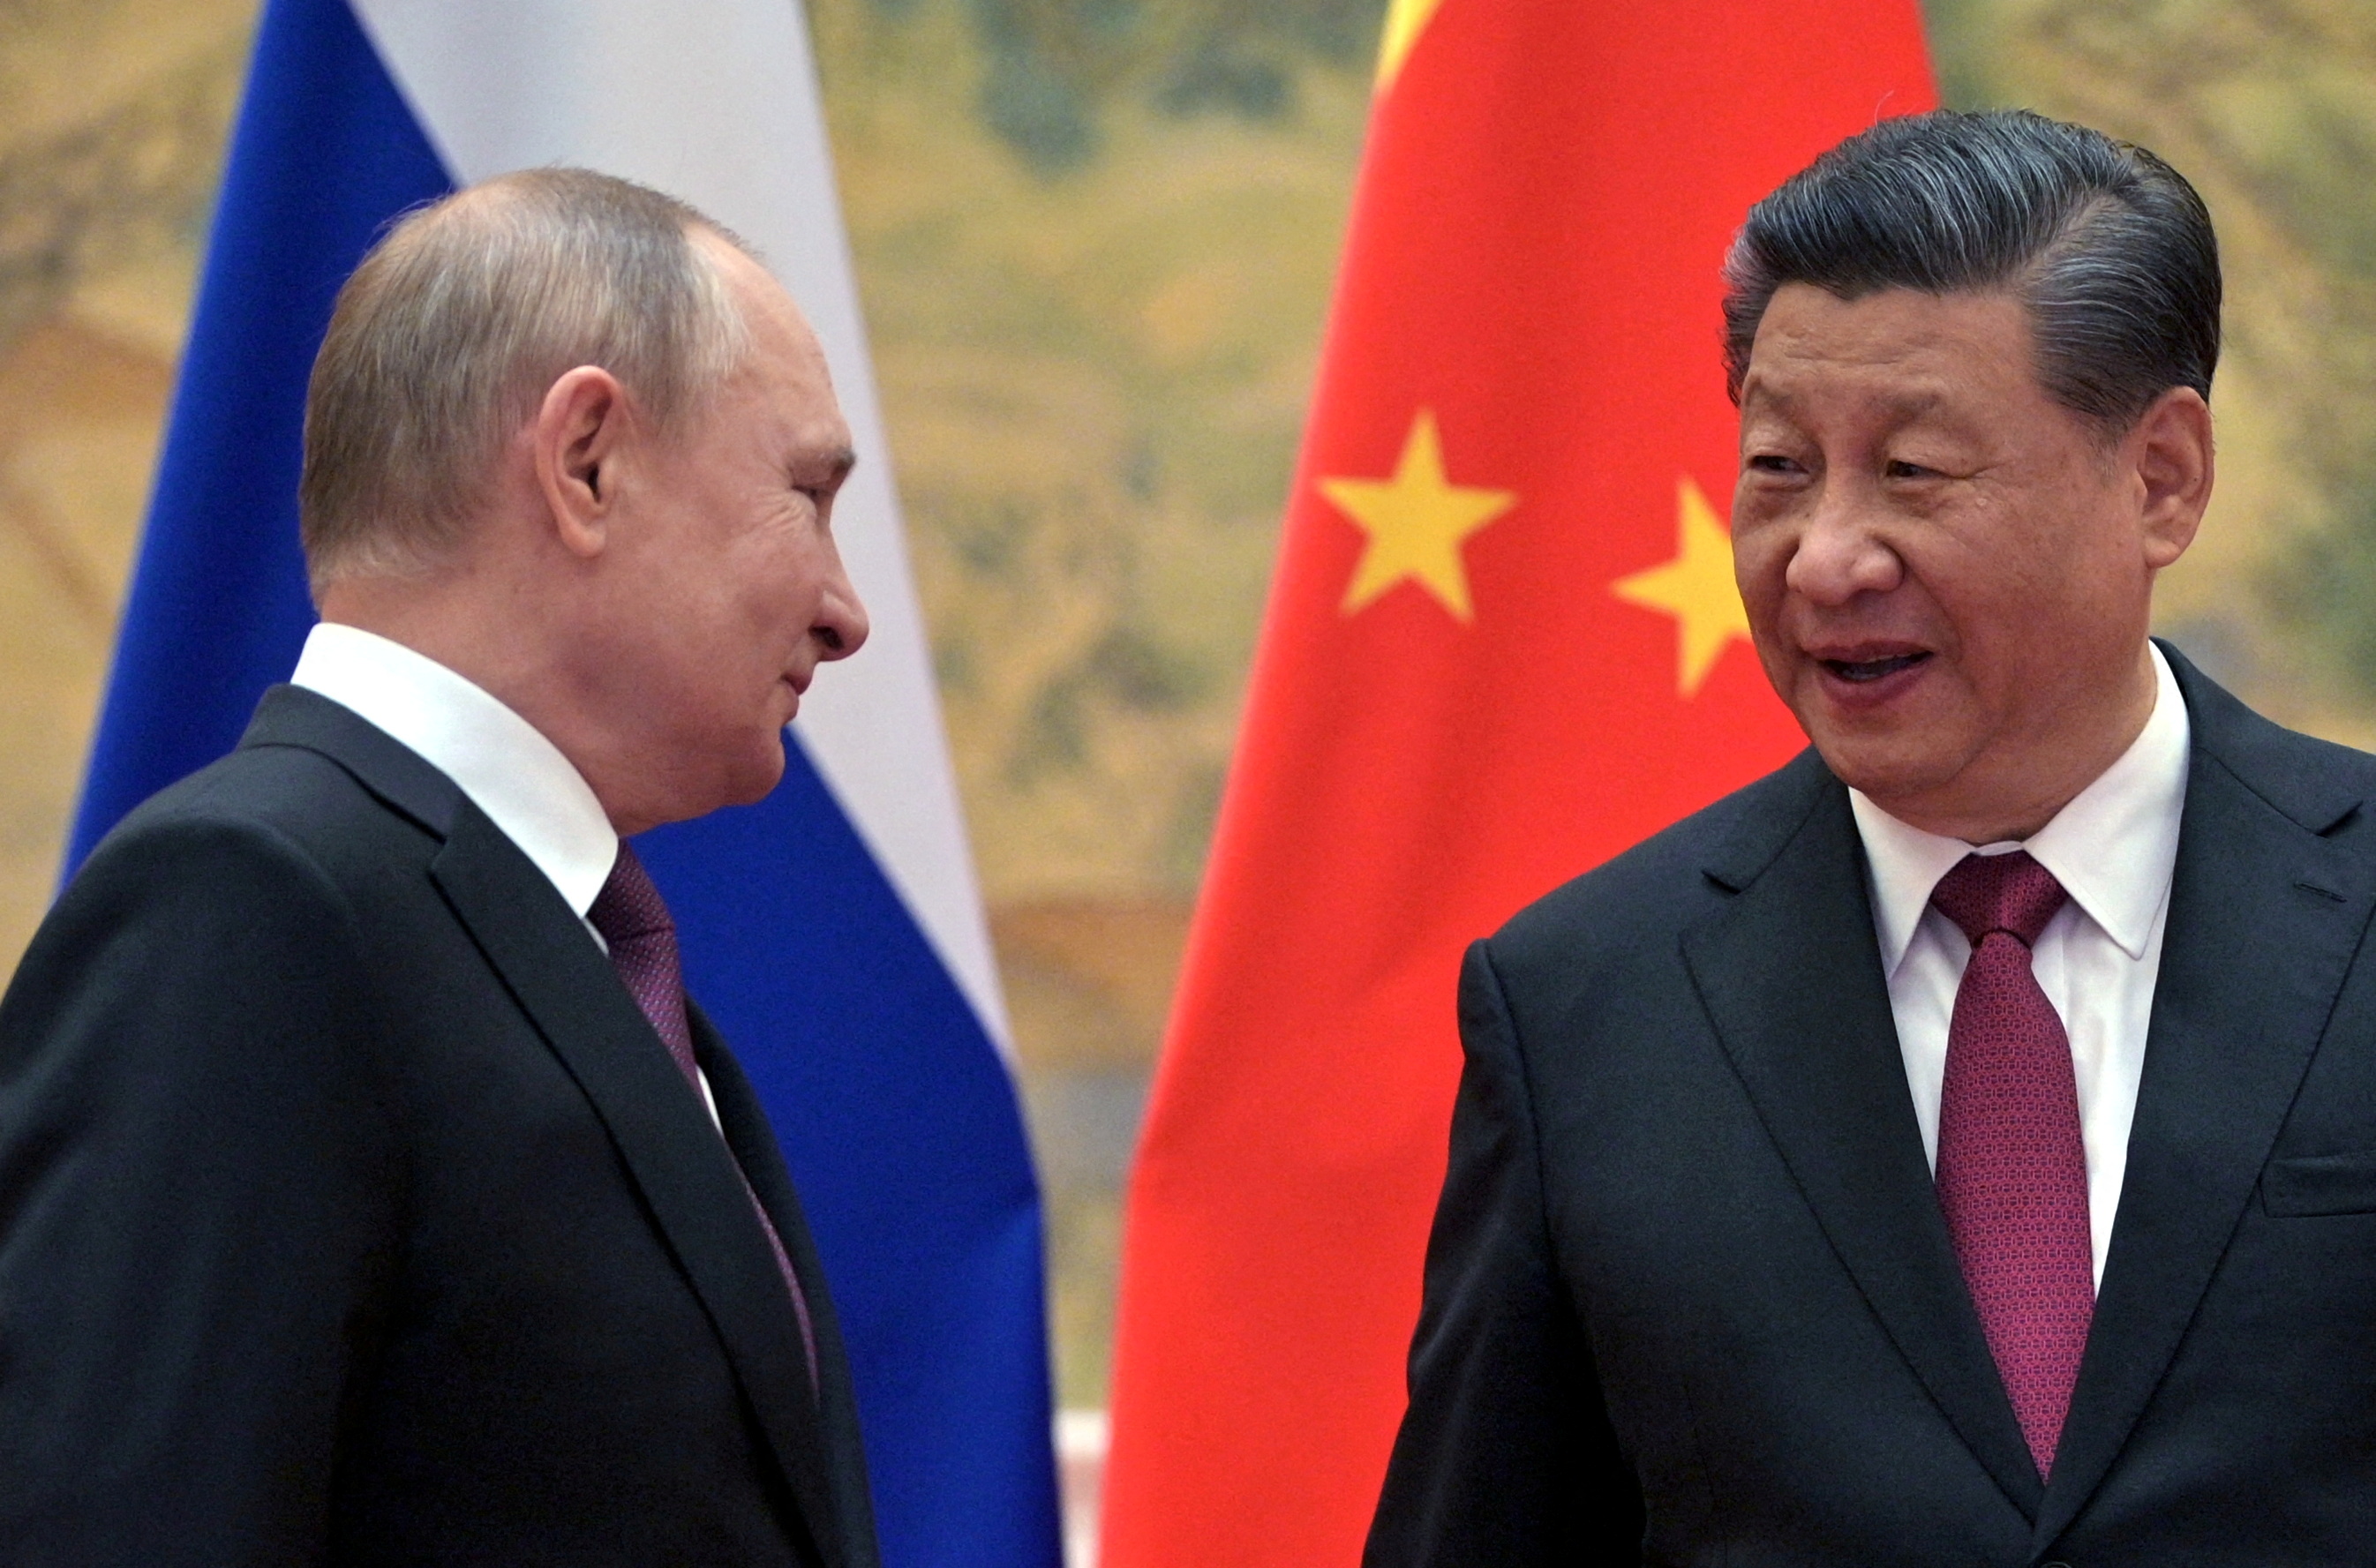 Xi tells Putin that China supports efforts to resolve Ukraine crisis via  dialogue - Chinese state media | Reuters